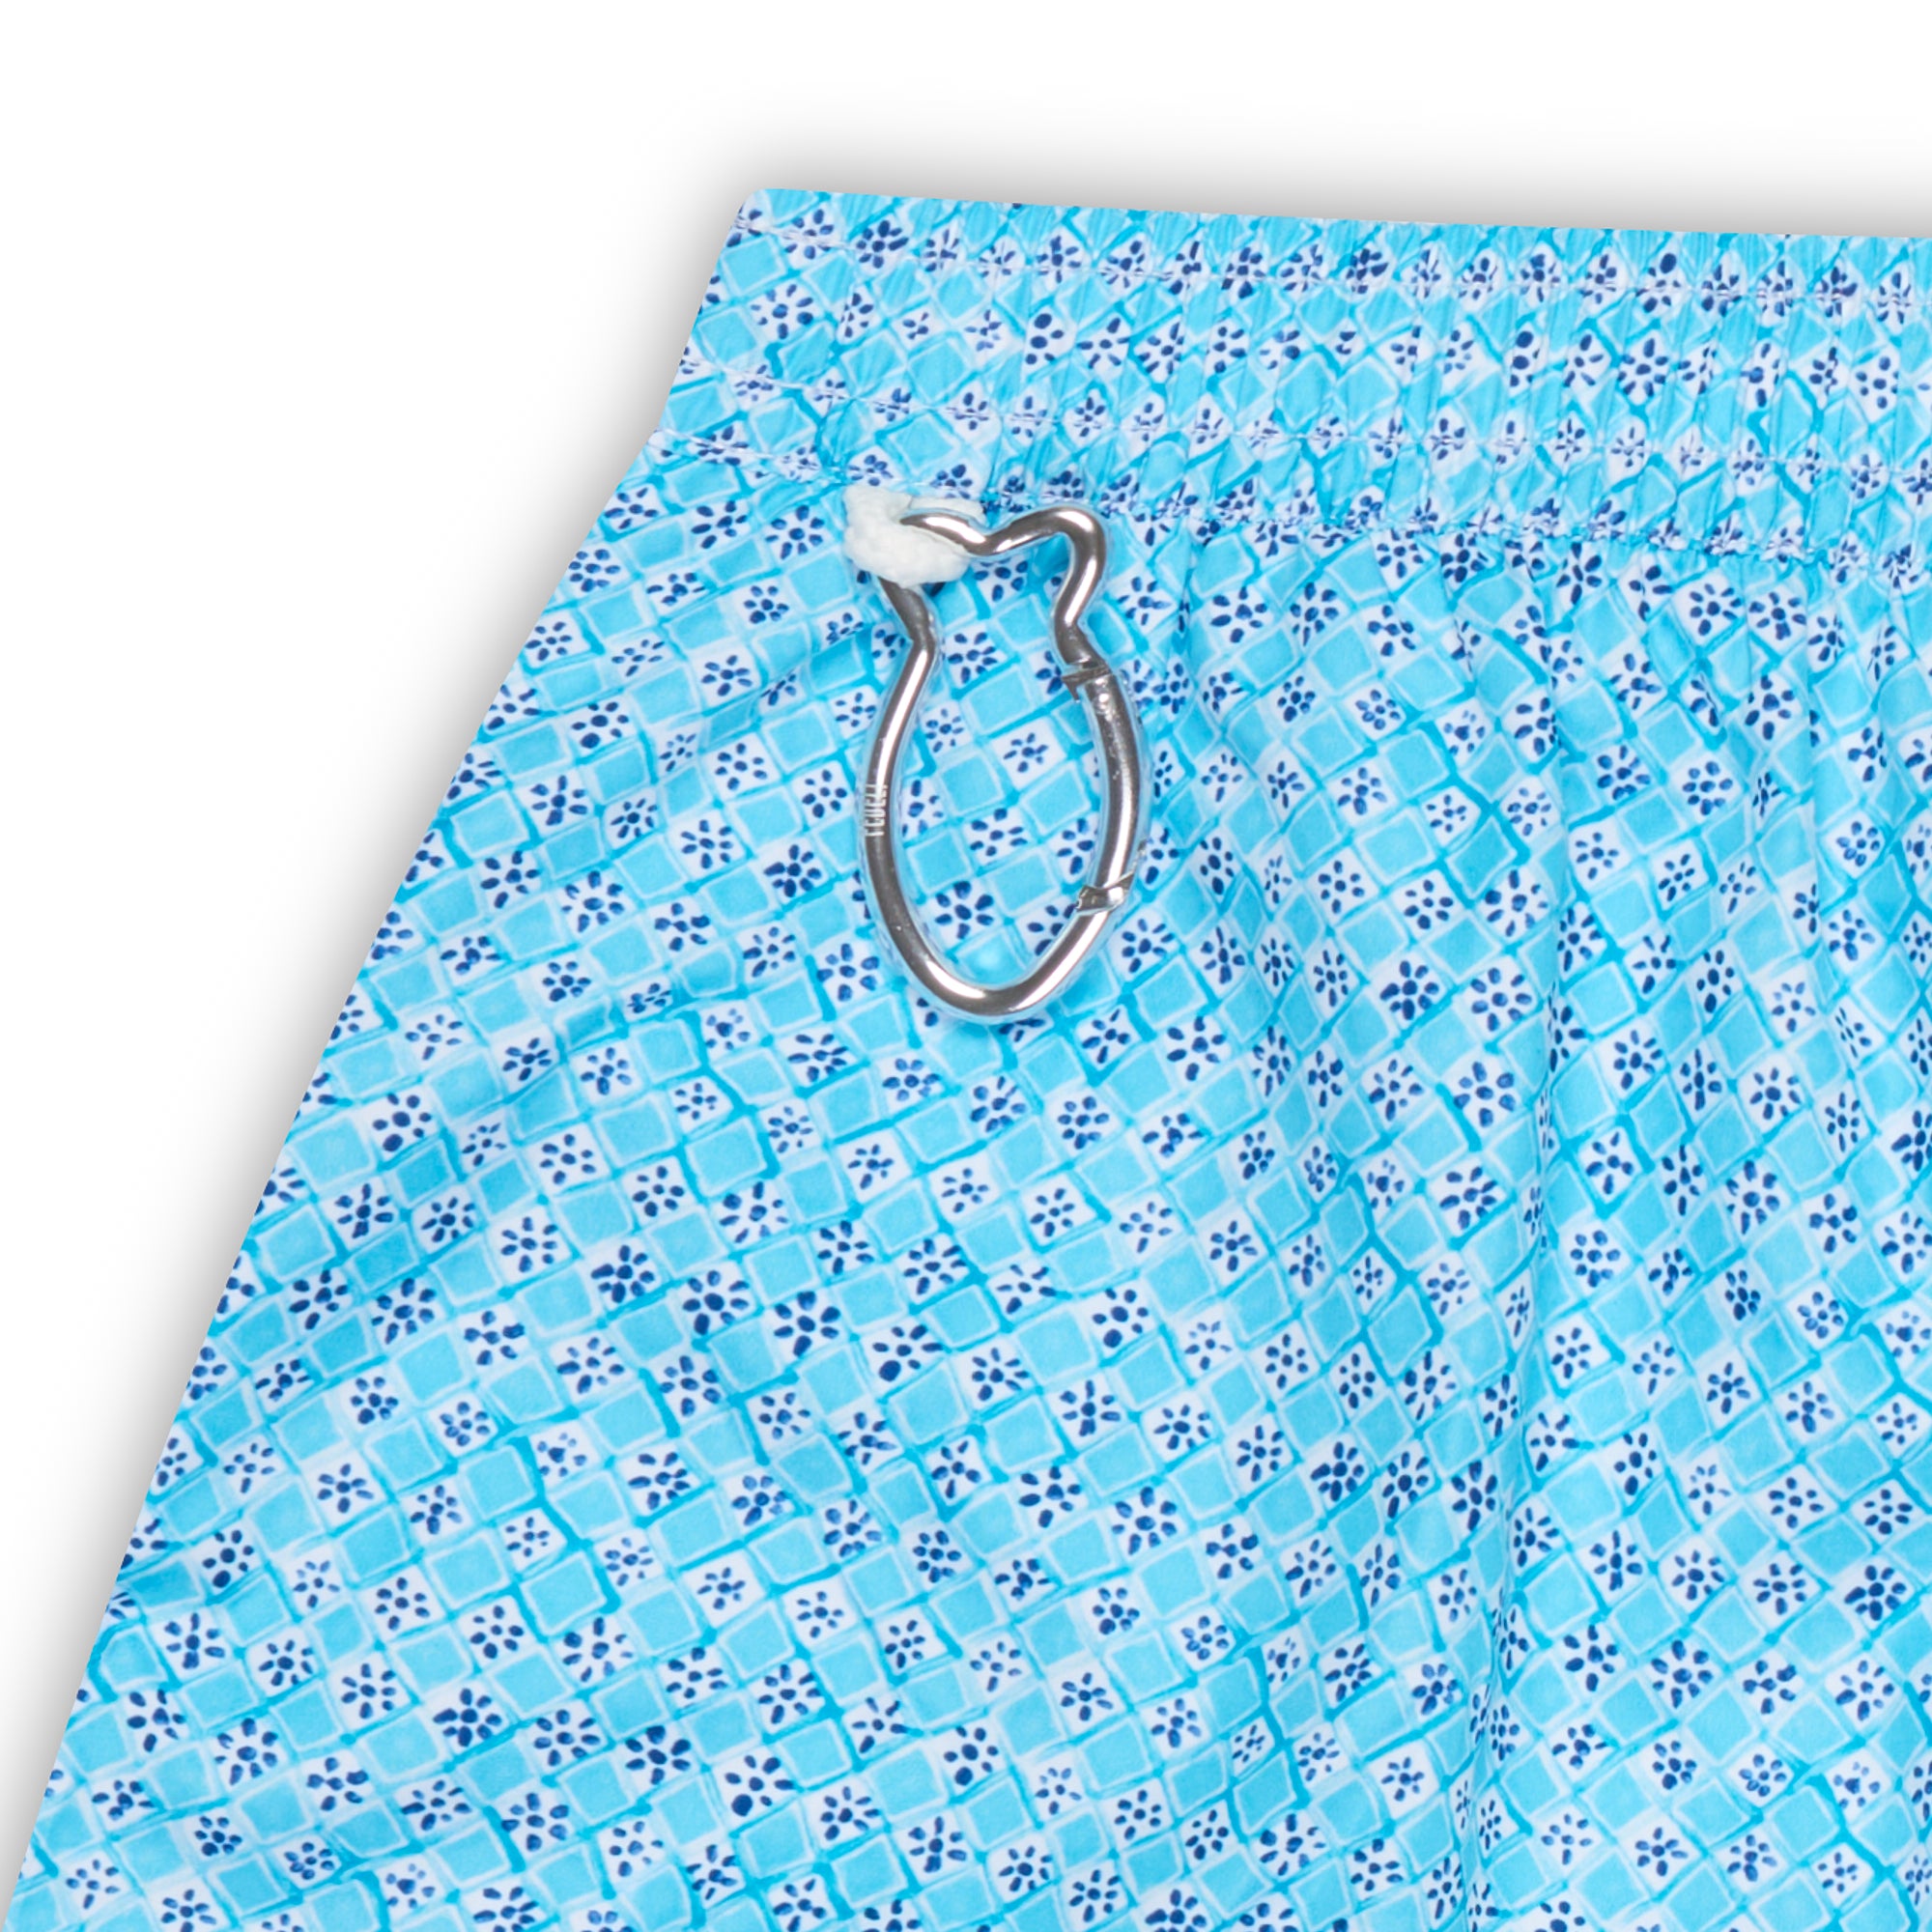 FEDELI Blue Floral Checkered Printed Madeira Airstop Swim Shorts Trunks NEW 3XL FEDELI